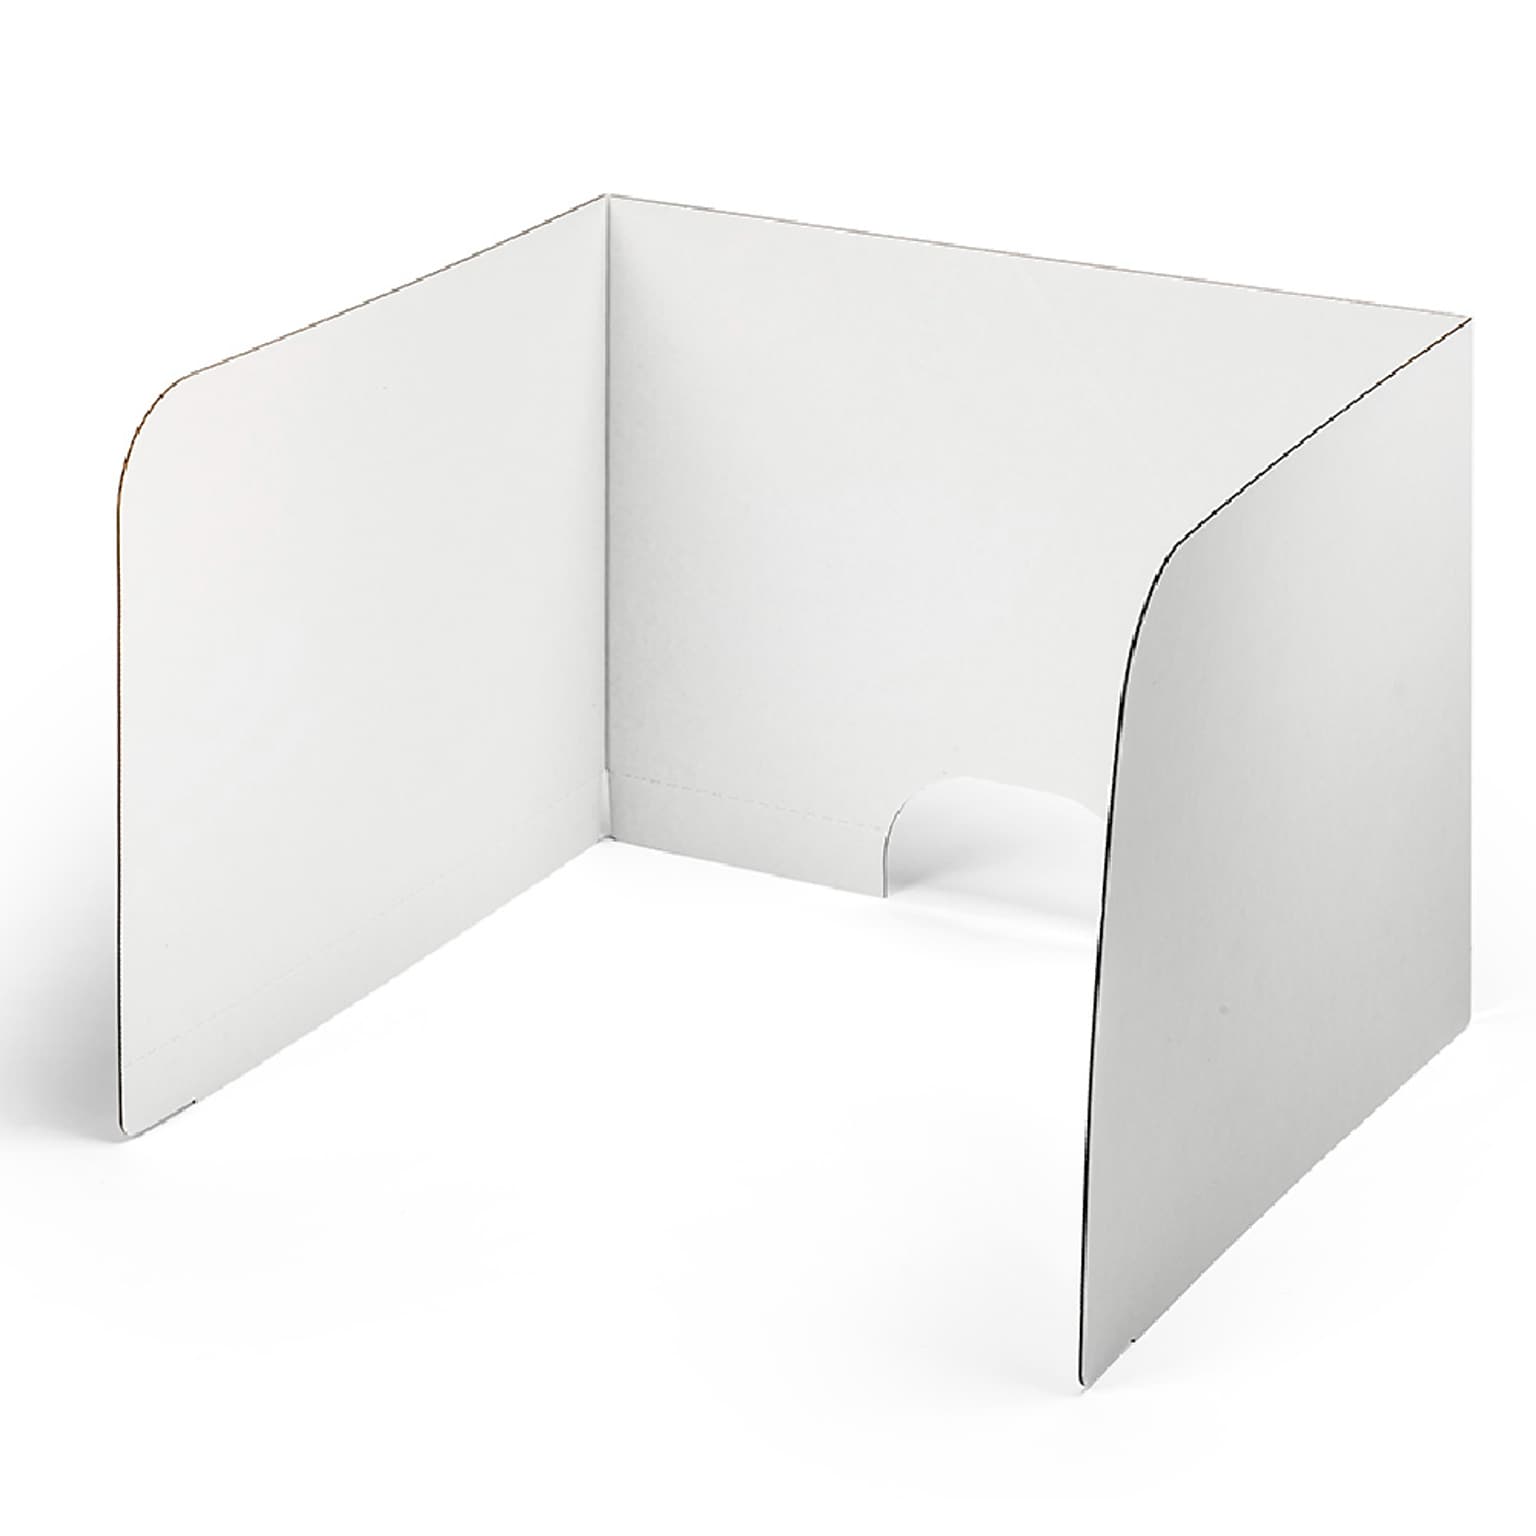 Classroom Products Foldable Cardboard Freestanding Privacy Shield, 19H x 26W, White, 10/Box (VB1910 WH)